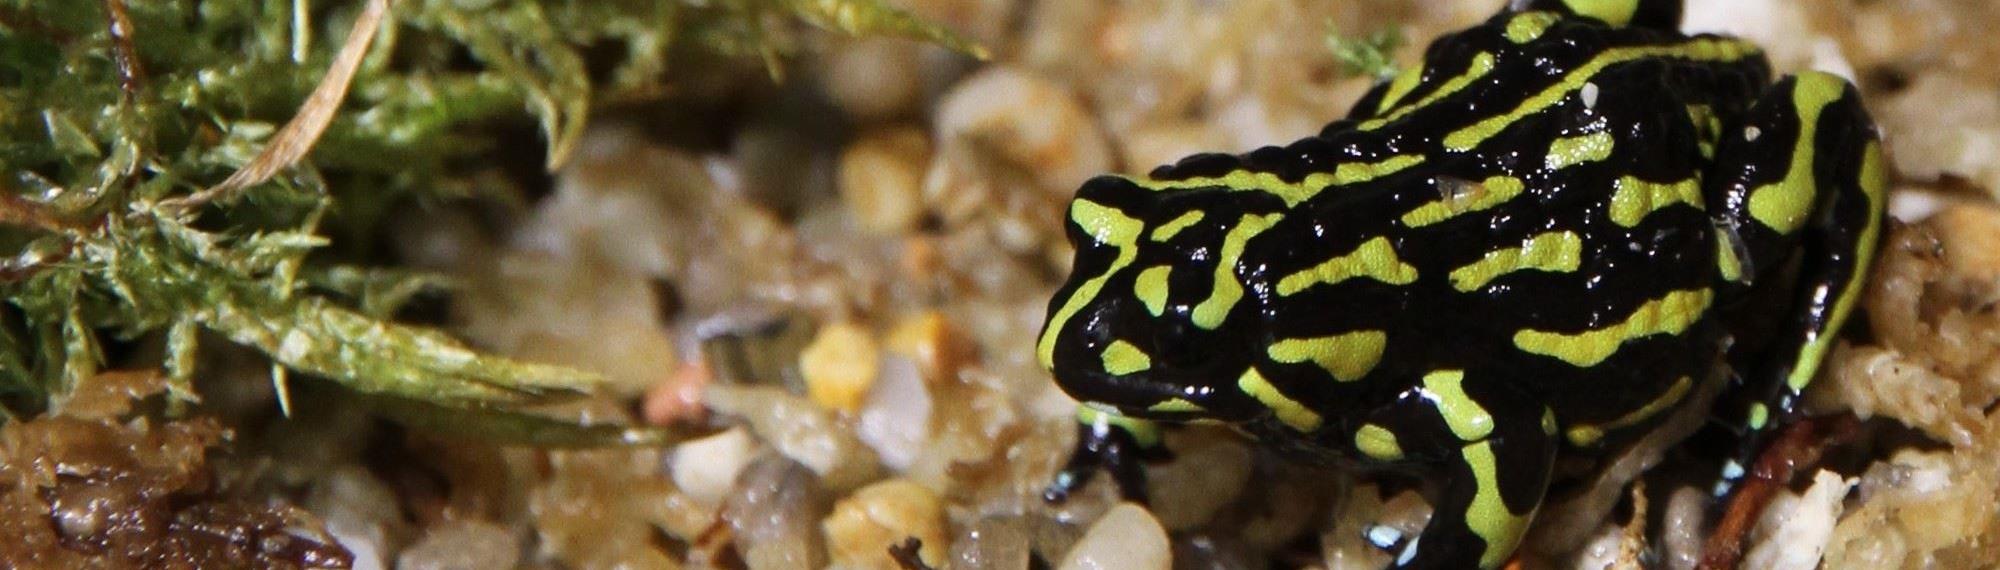 Northern Corroboree Frog with its vivid yellow and black stripes sitting on wet pebbles next to moss.